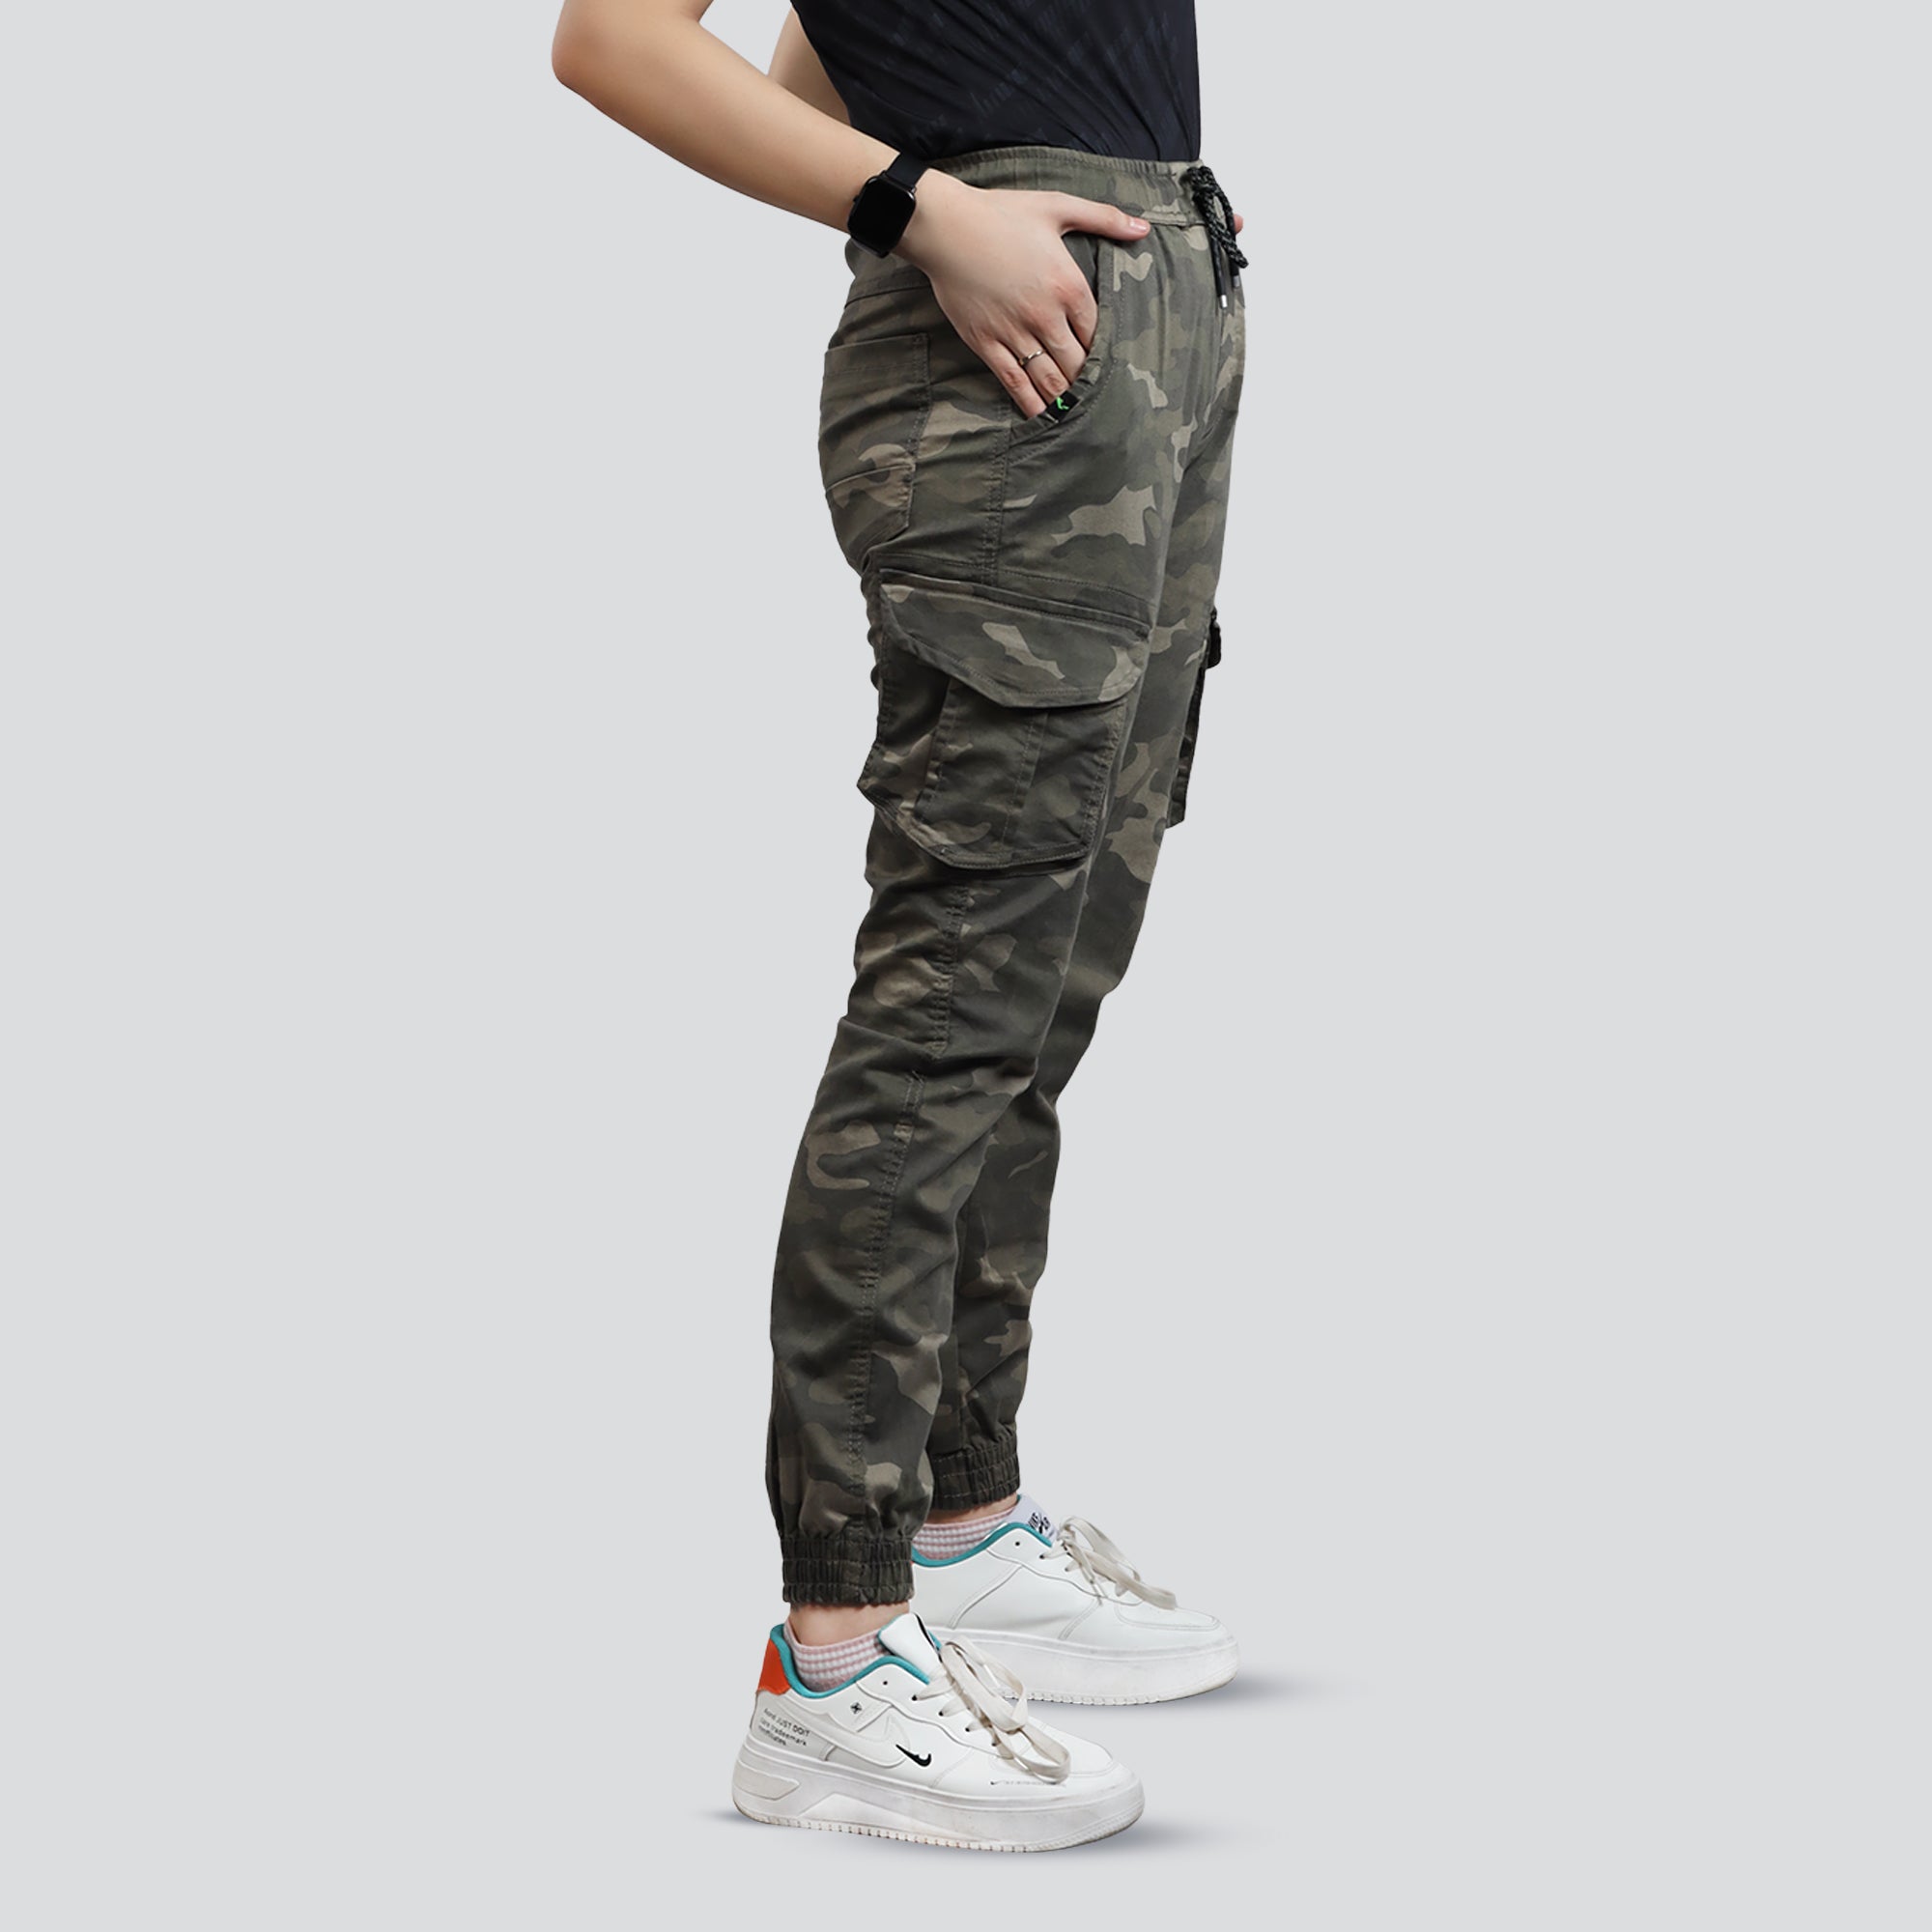 Women's Camo Cargo Pants With 6 pockets